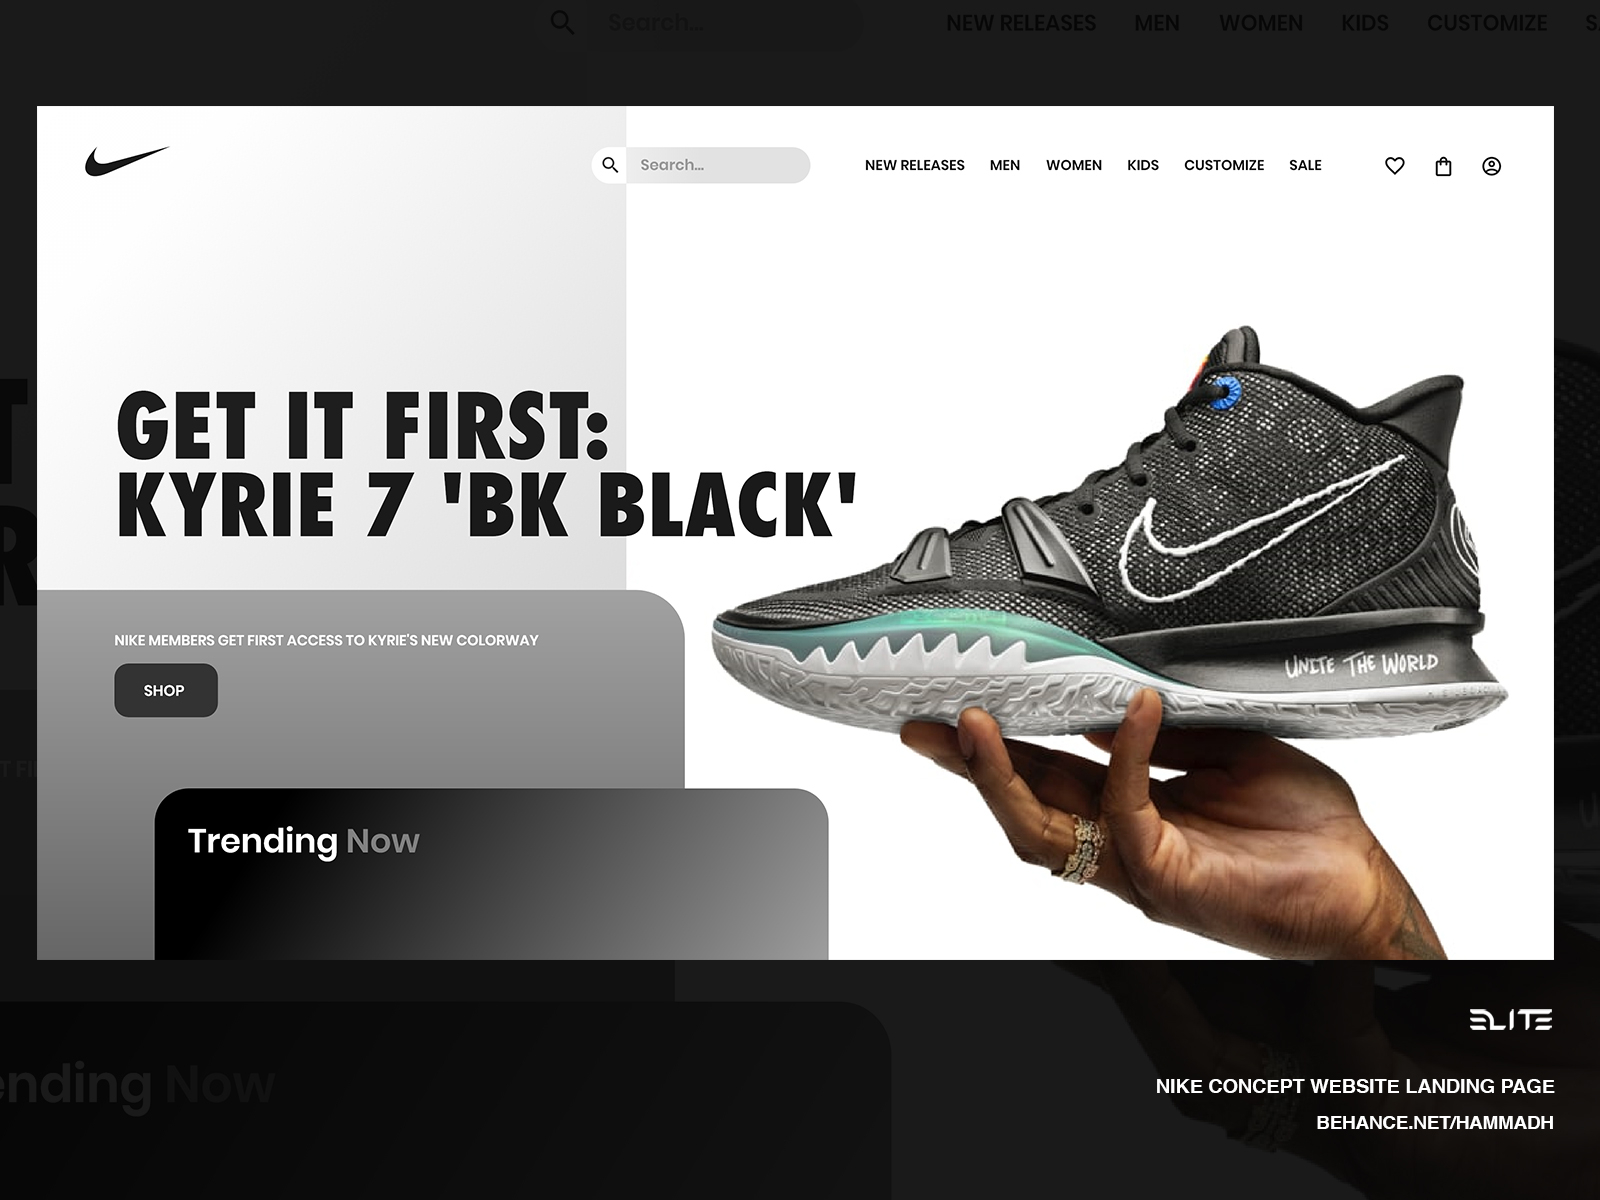 Nike Website Landing Page - UI Design Exploration by Hammadh Arquil on ...